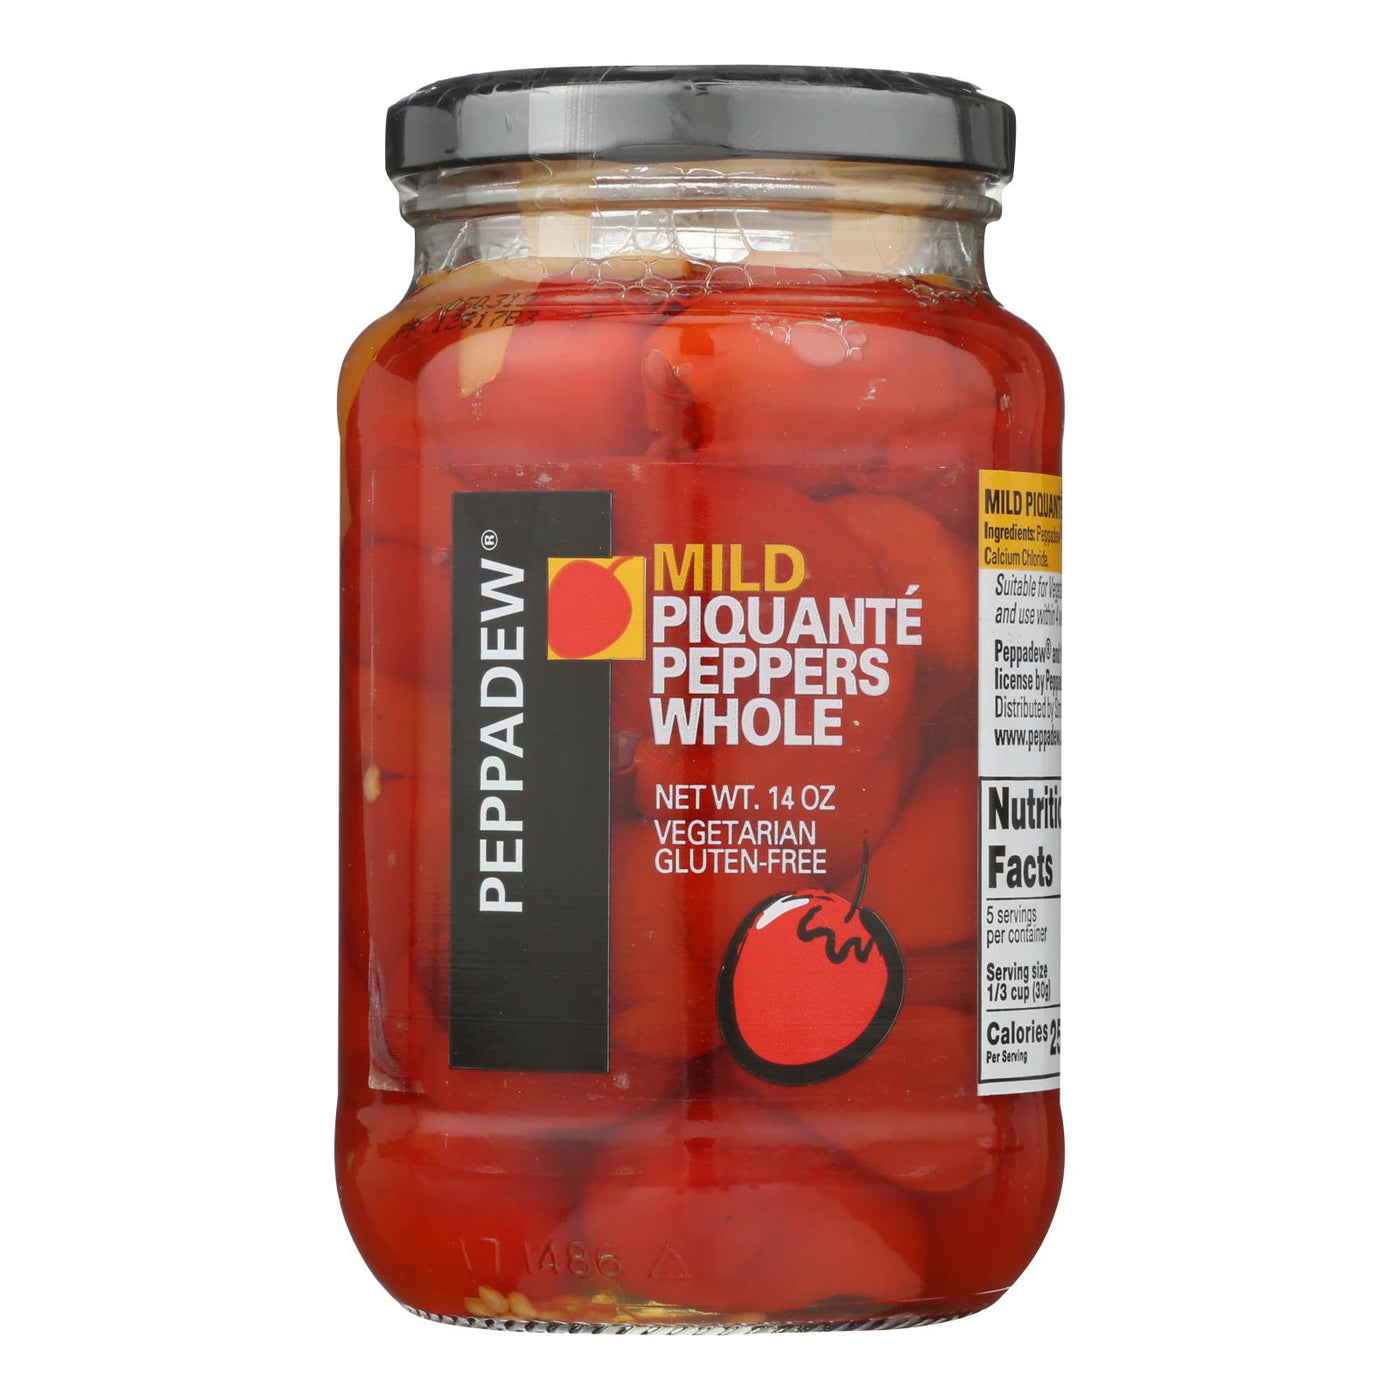 Peppadew Mild Whole Piquante Peppers  - Case Of 12 - 14 Oz | OnlyNaturals.us